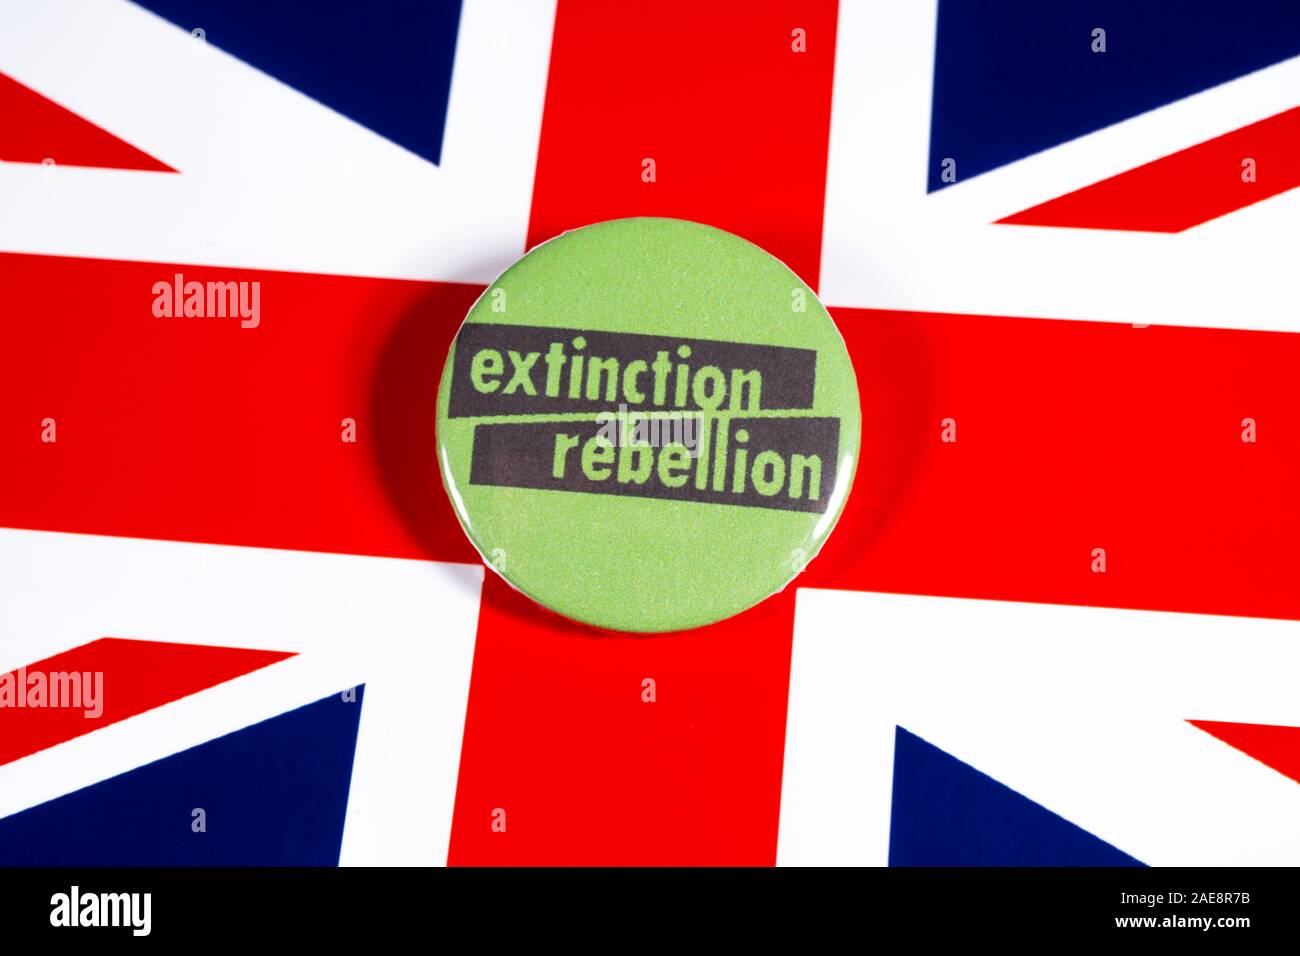 London, UK - November 22nd 2019: The symbol of Extinction Rebellion - the global environmental movement, pictured over the flag of the United Kingdom. Stock Photo